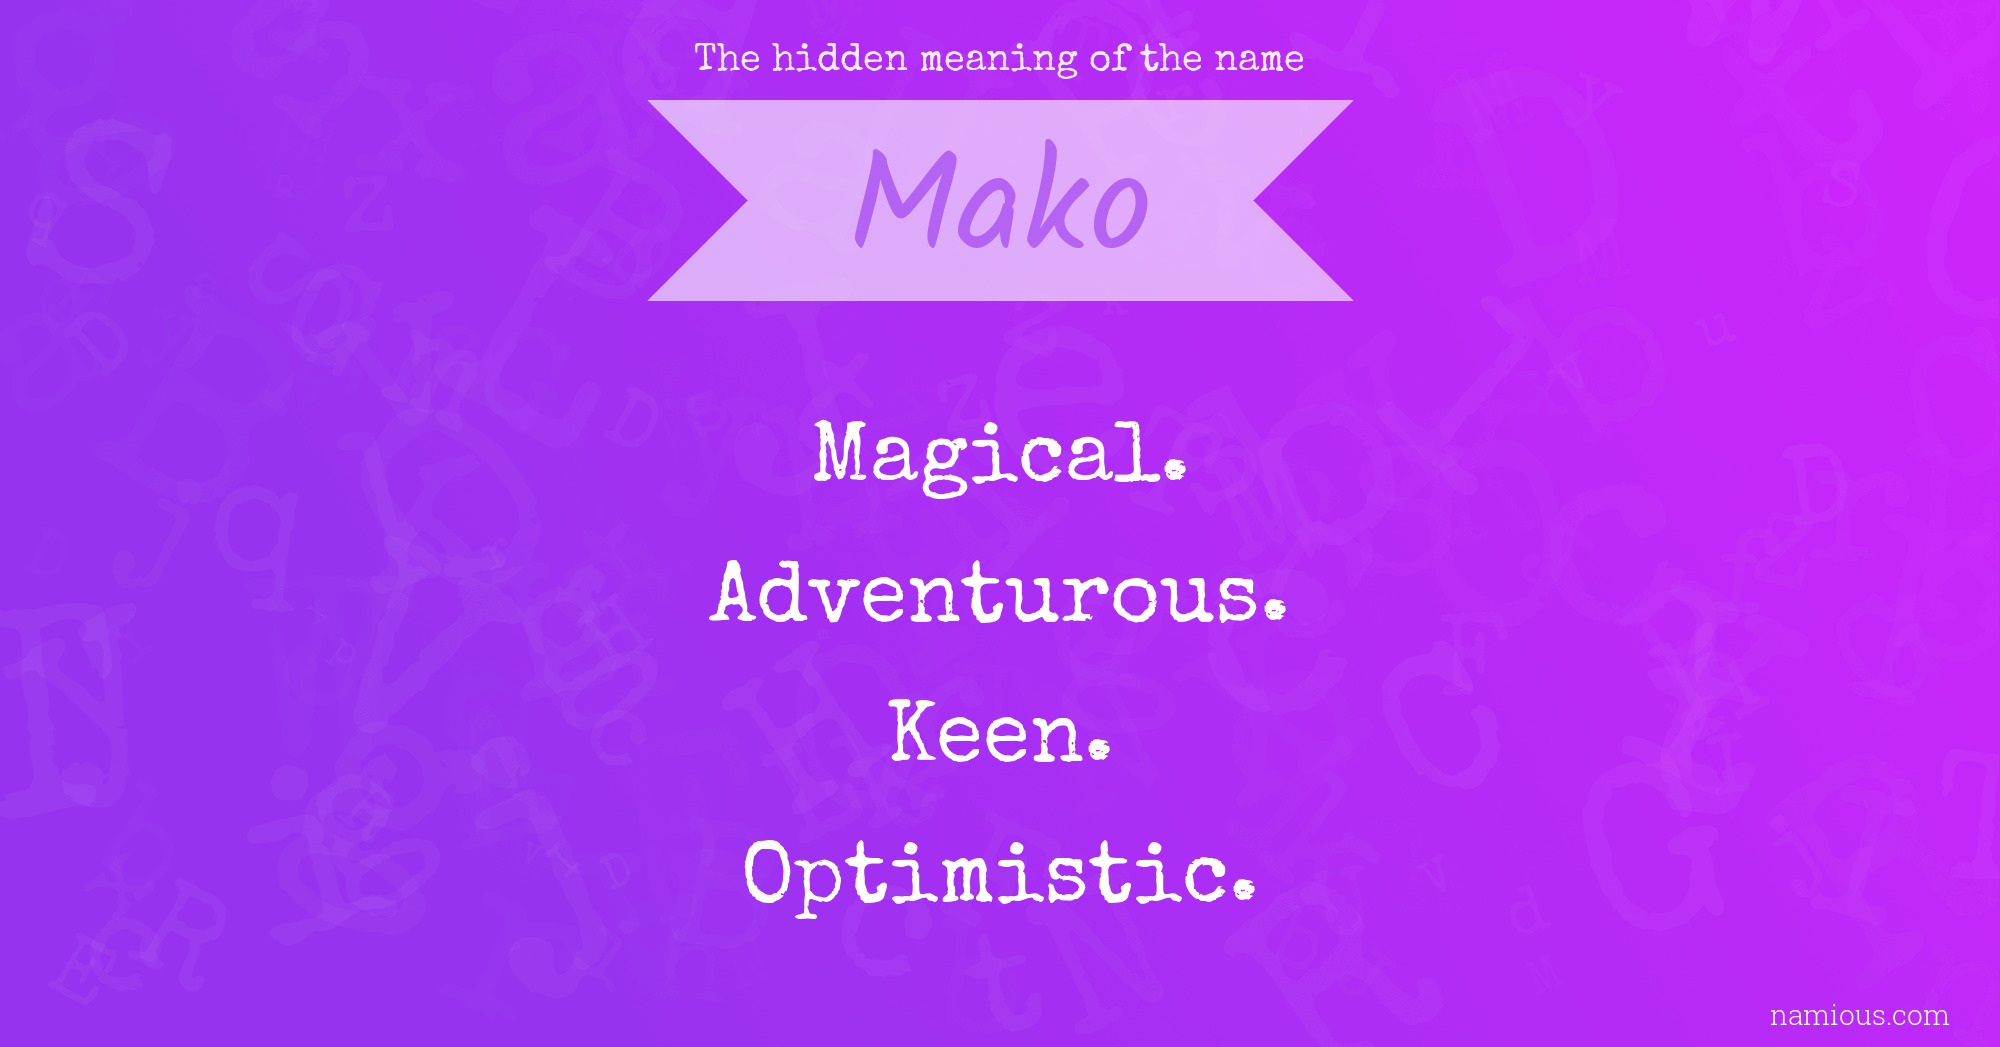 The hidden meaning of the name Mako